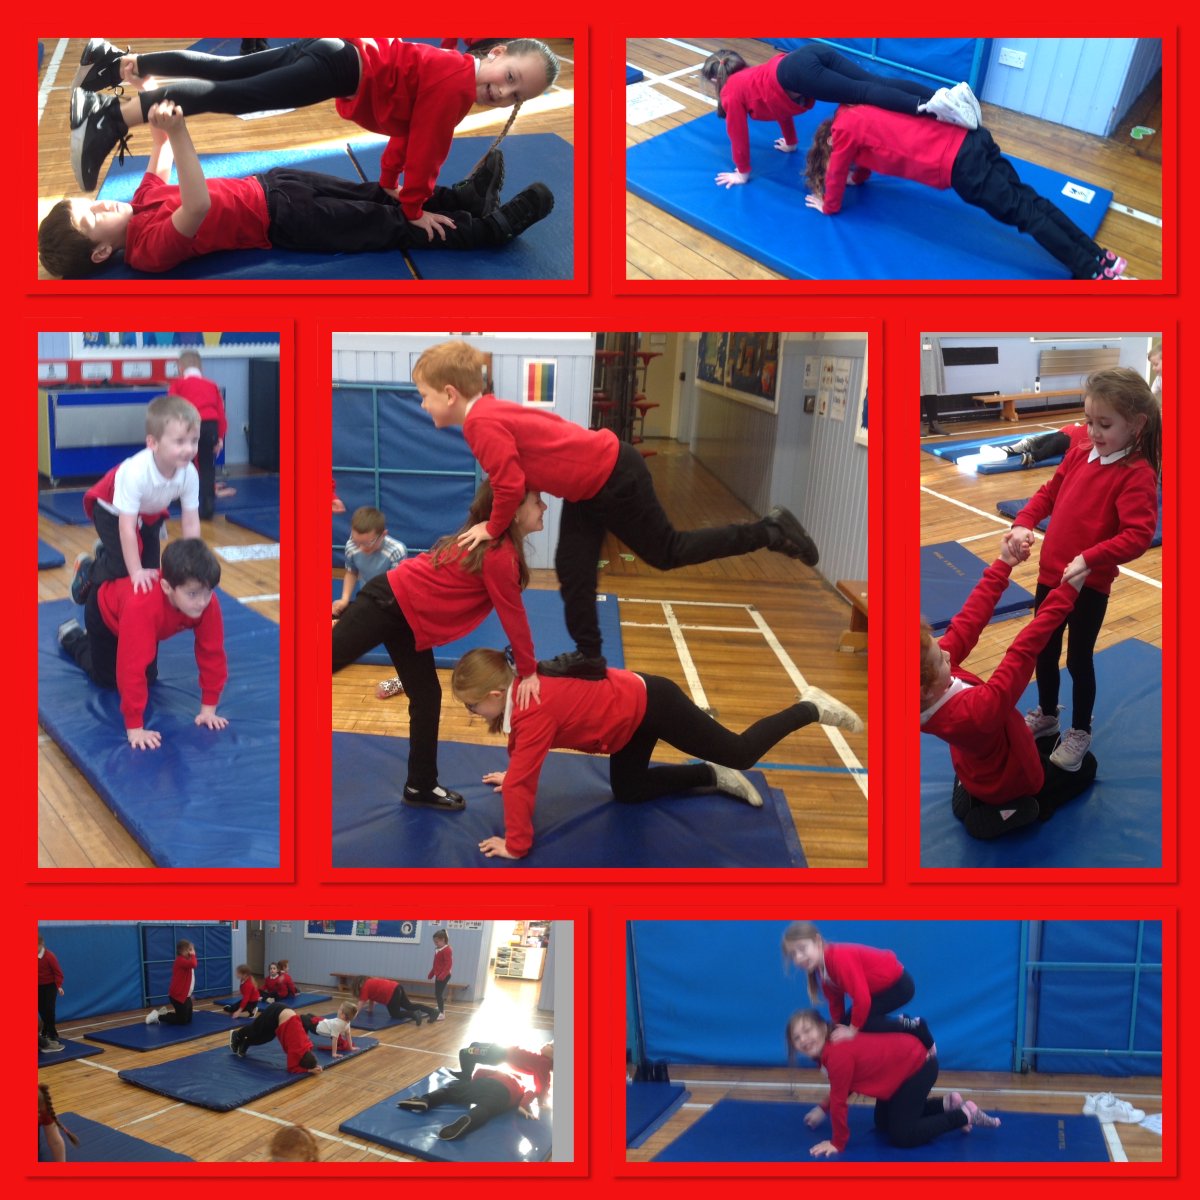 We have started our Gymnastics block this week in PE. We are developing our balance, strength and responsibility. @ActiveClacks @ClacksEducation #ClacksPrimaryPE #gymnastics